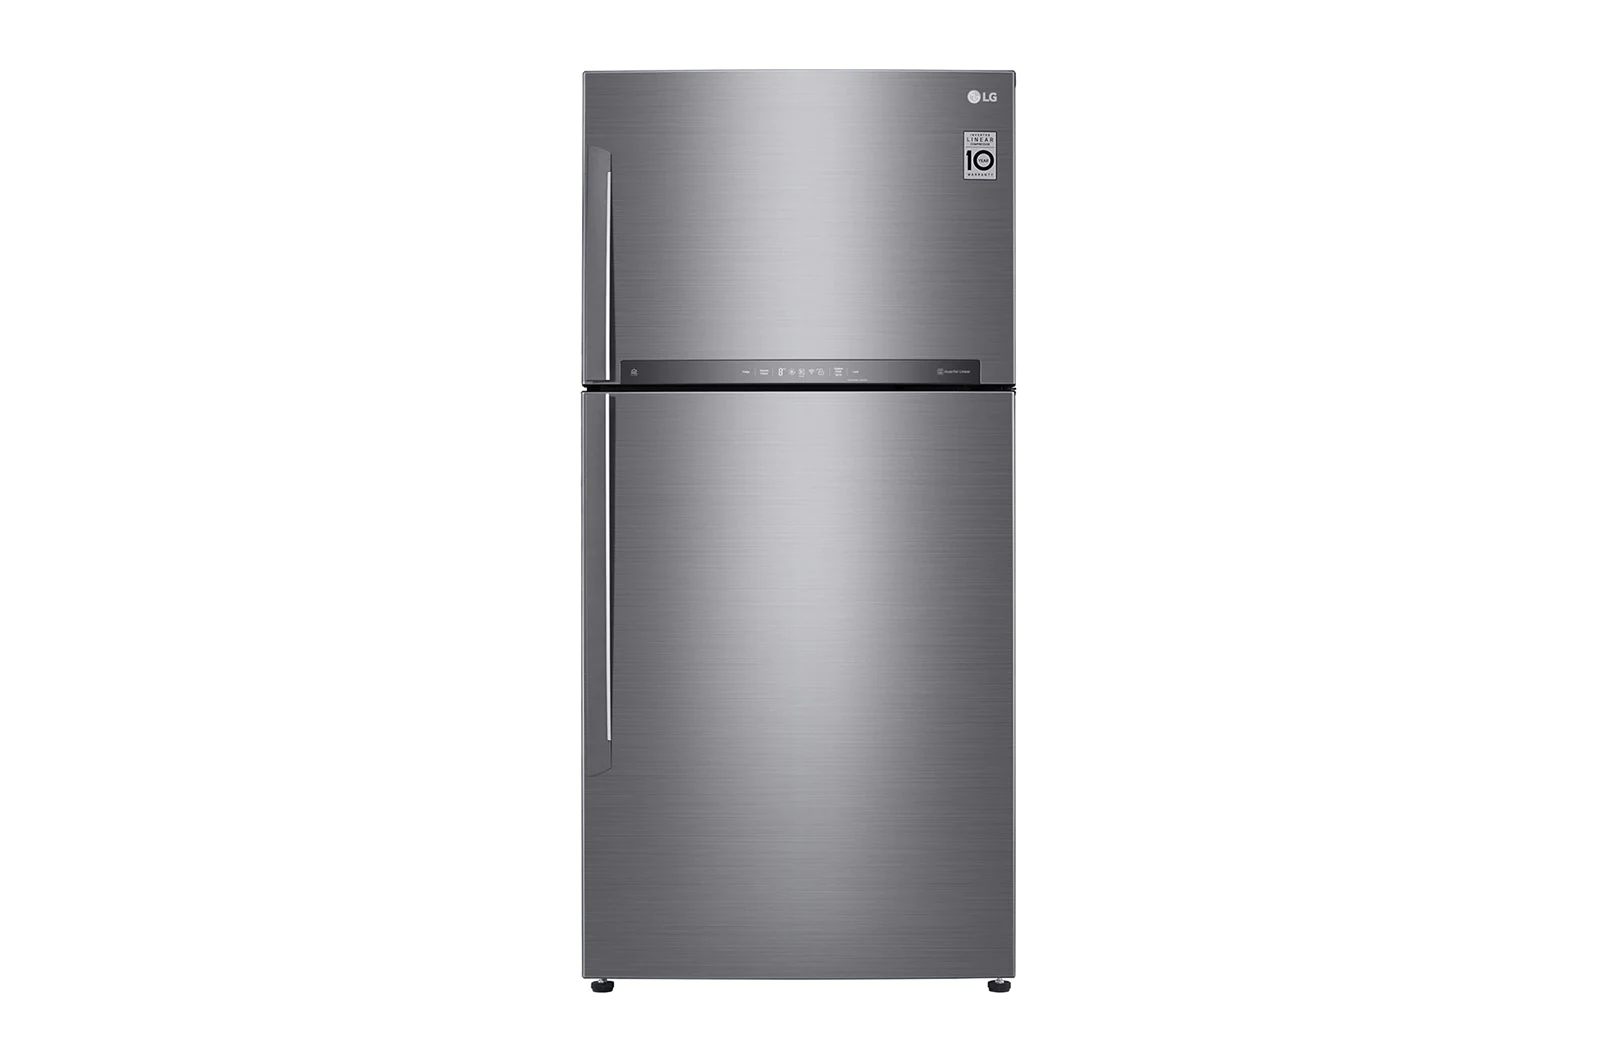 LG 630L Refrigerator With DoorCooling+™ Technology - Silver